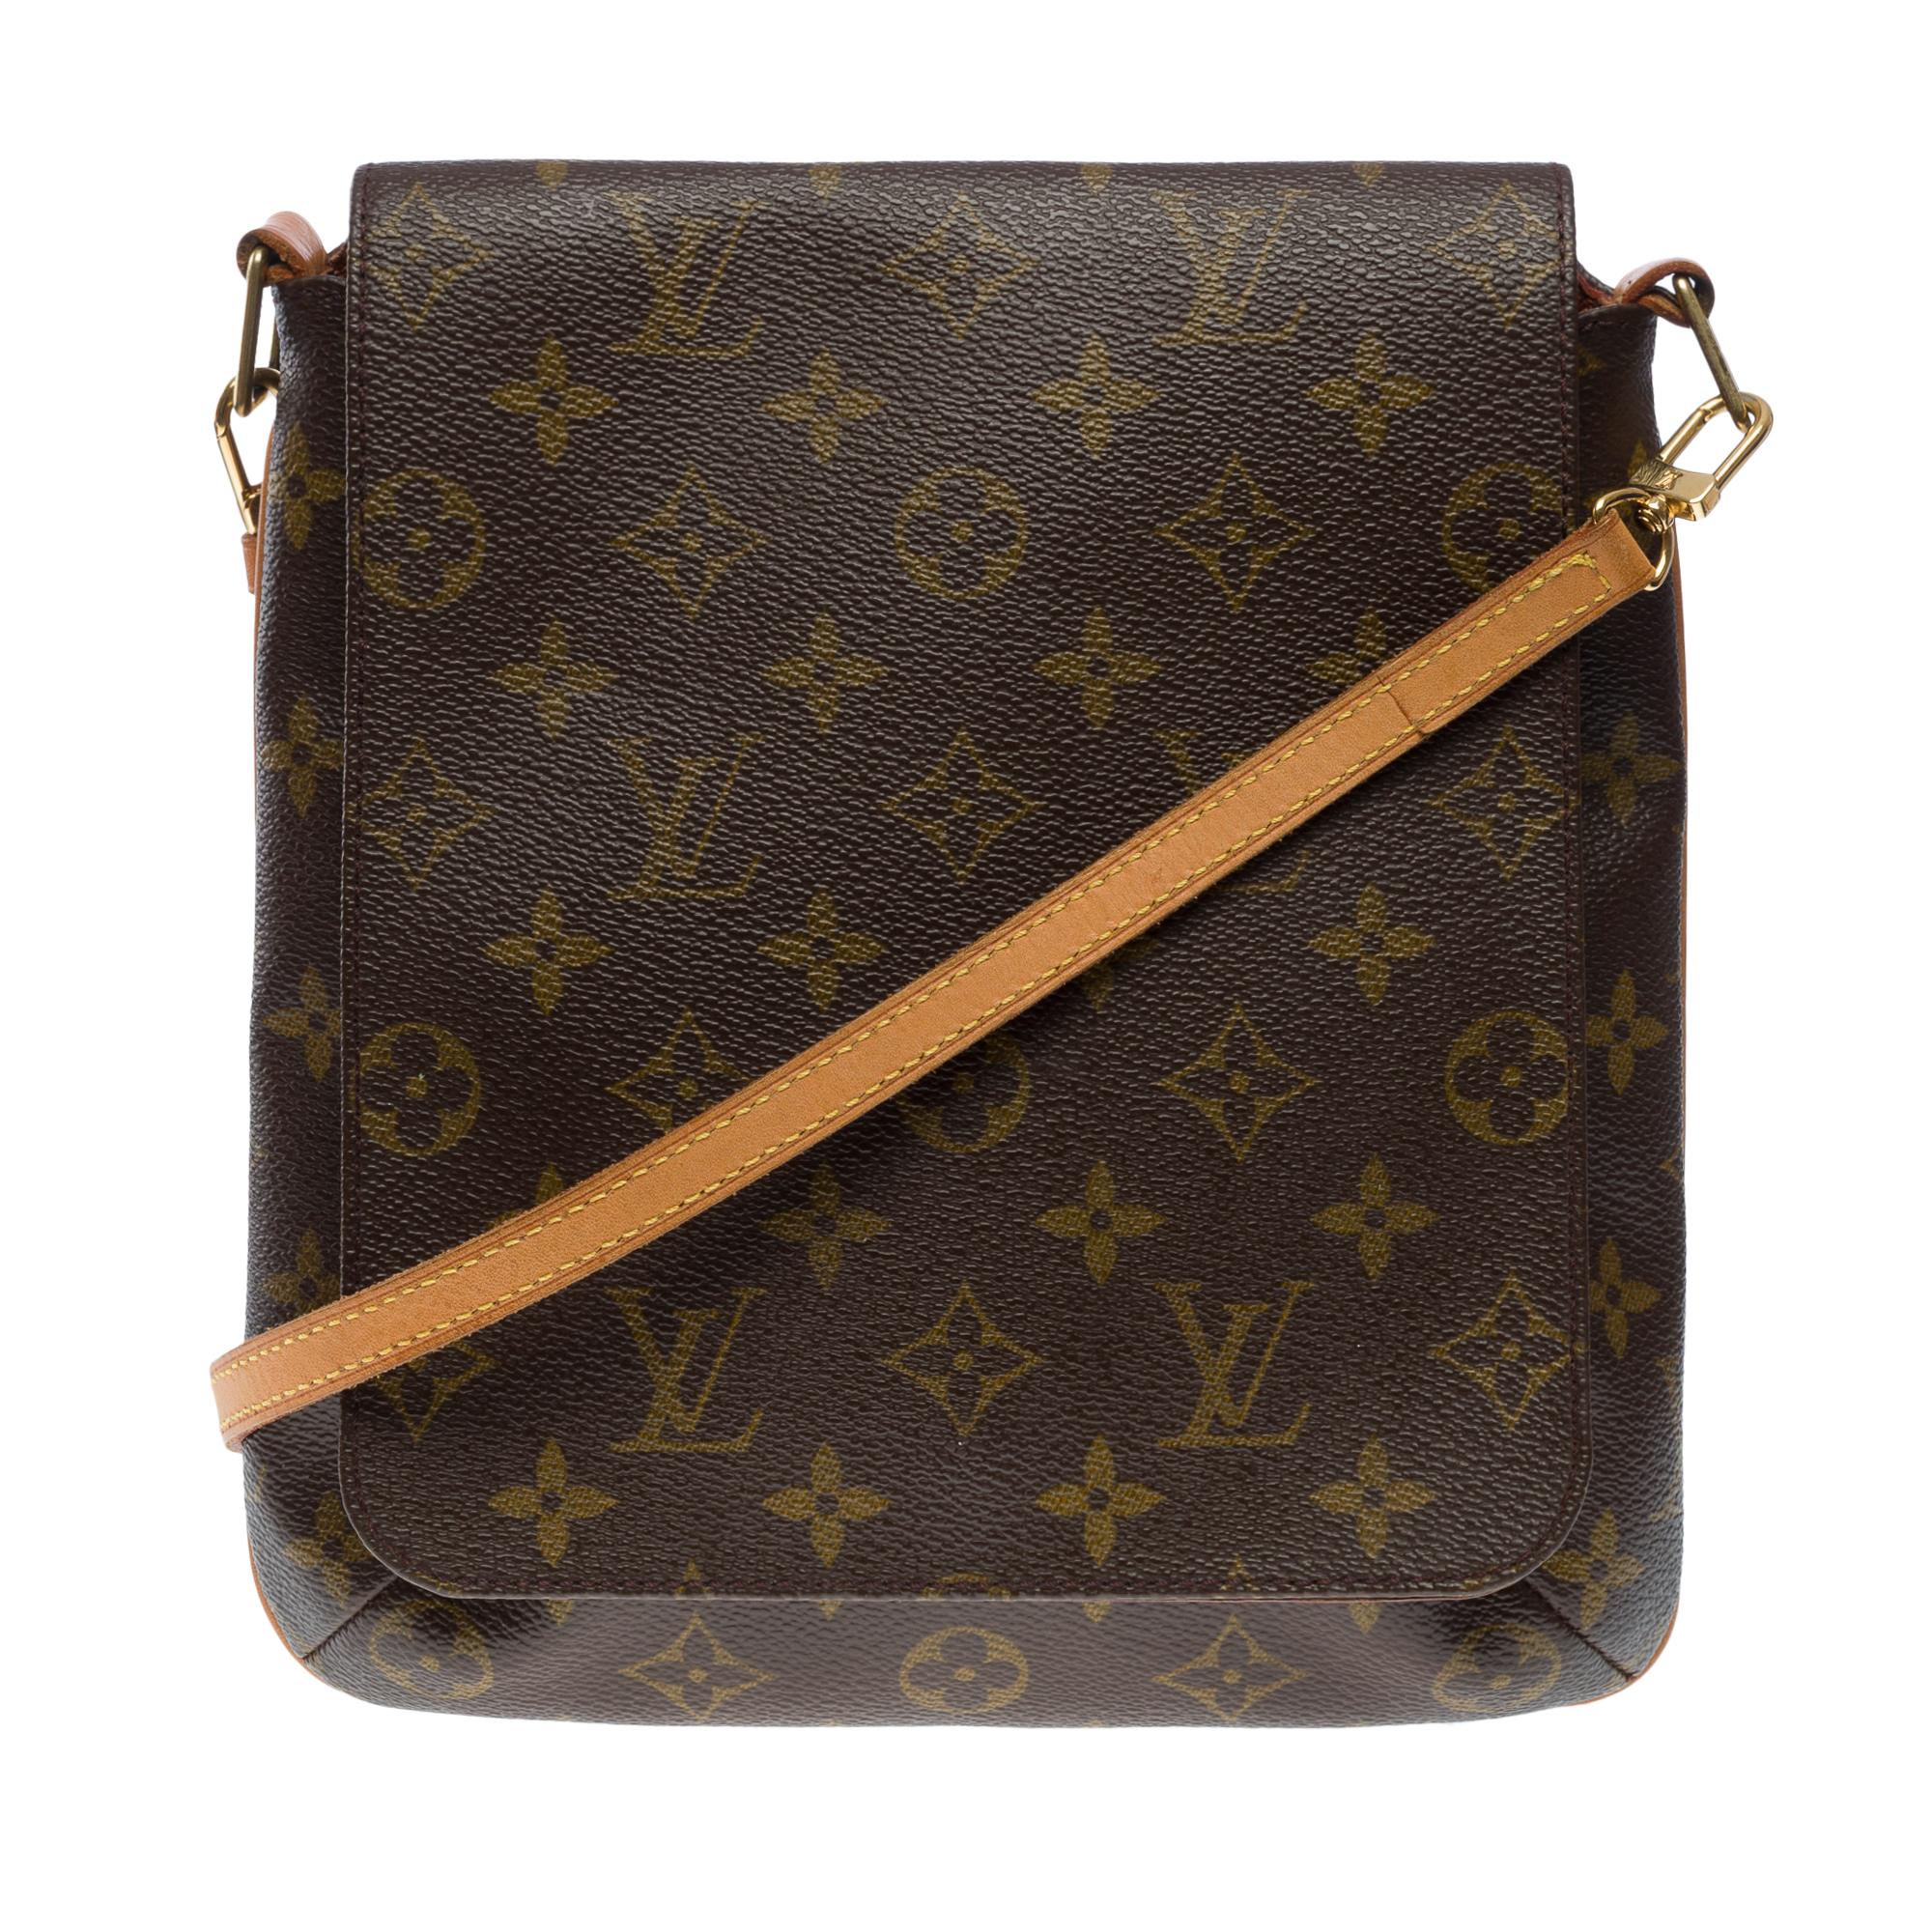 Very​ ​contemporary​ ​Louis​ ​Vuitton​ ​Salsa​ ​Musette​ ​in​ ​brown​ ​monogram​ ​canvas​ ​and​ ​strap​ ​in
natural​ ​calf​ ​leather​ ​adjustable​ ​to​ ​7​ ​levels​ ​allowing​ ​a​ ​shoulder​ ​or​ ​crossbody​ ​carry

Flap​ ​closure
Inner​ ​lining​